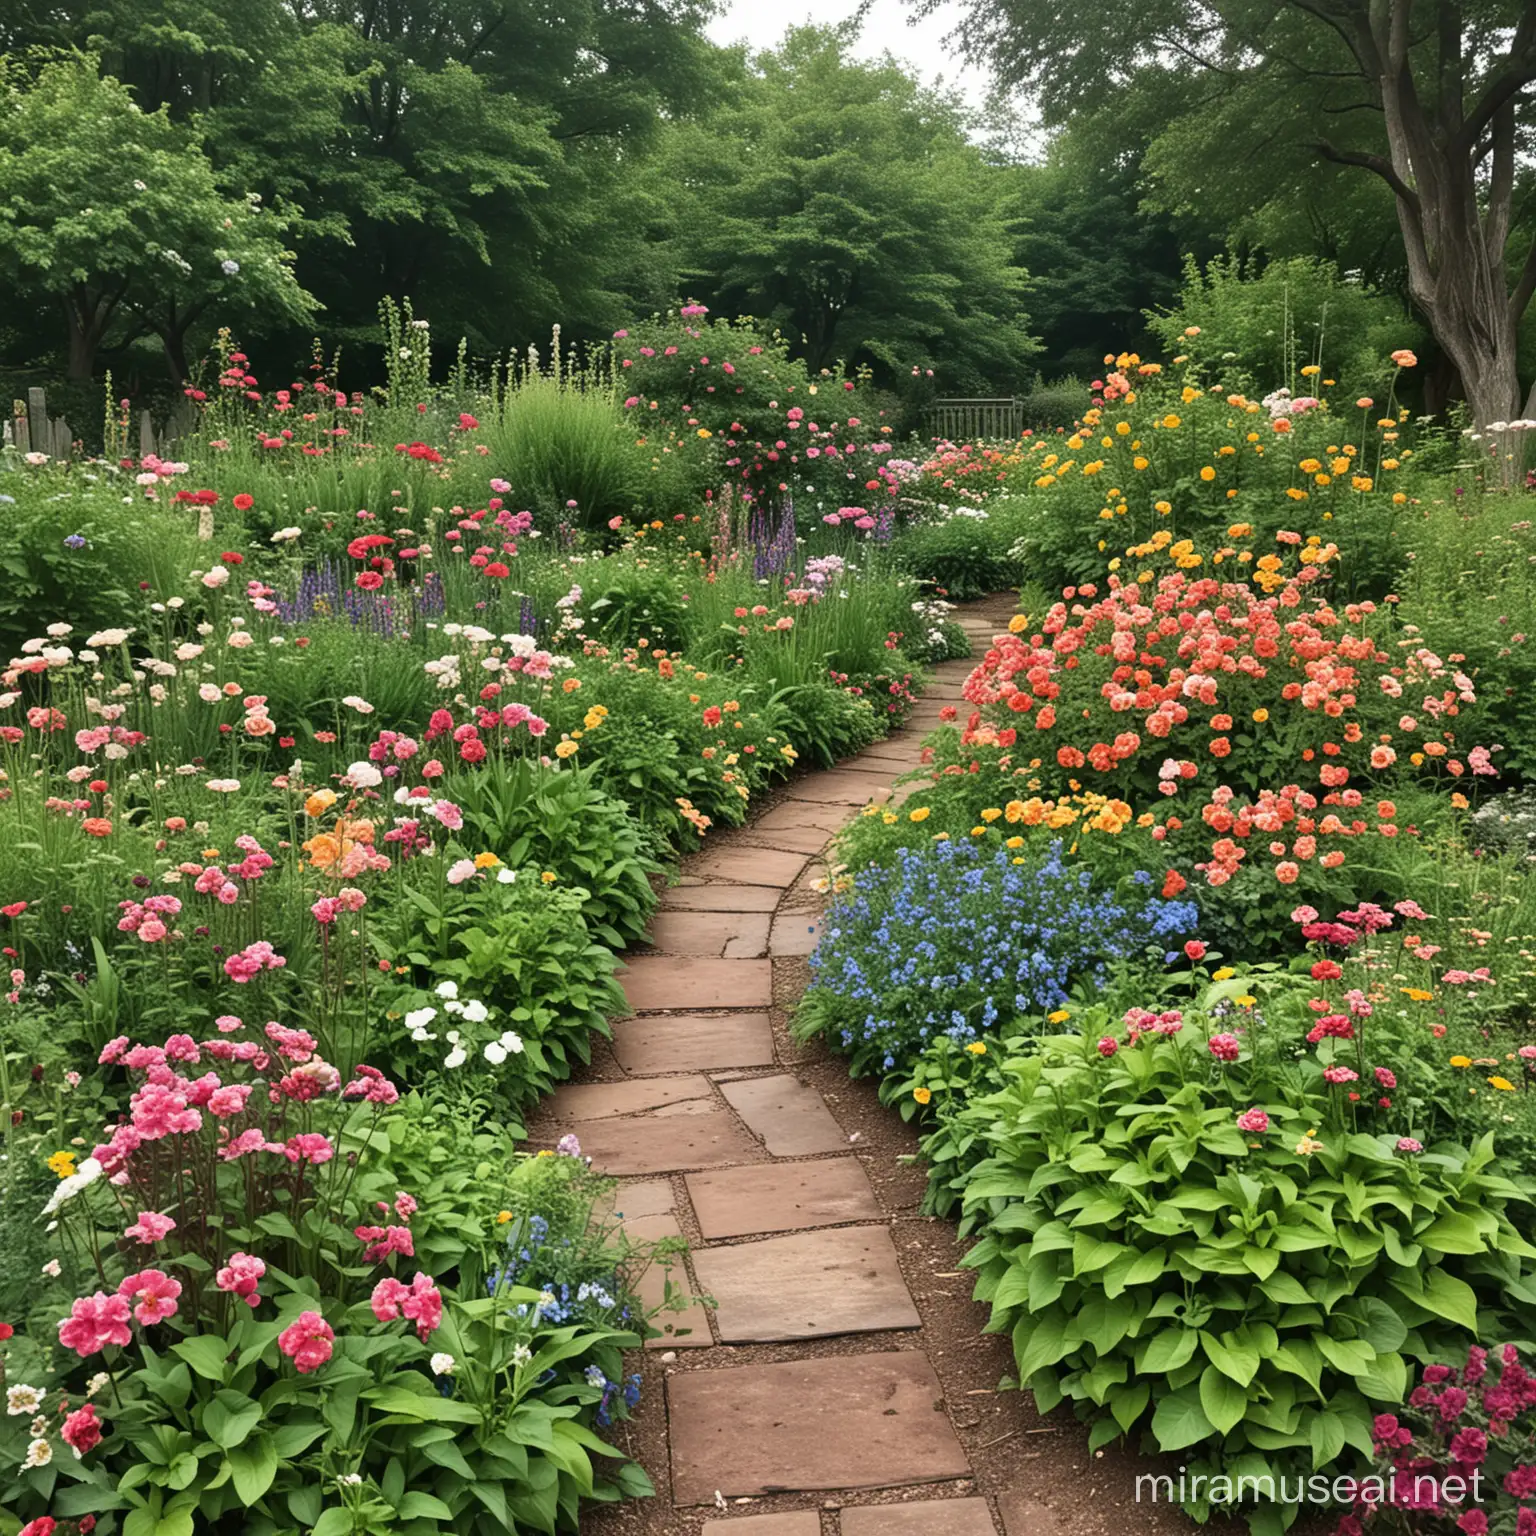 Vibrant Garden Bursting with Colorful Blooms